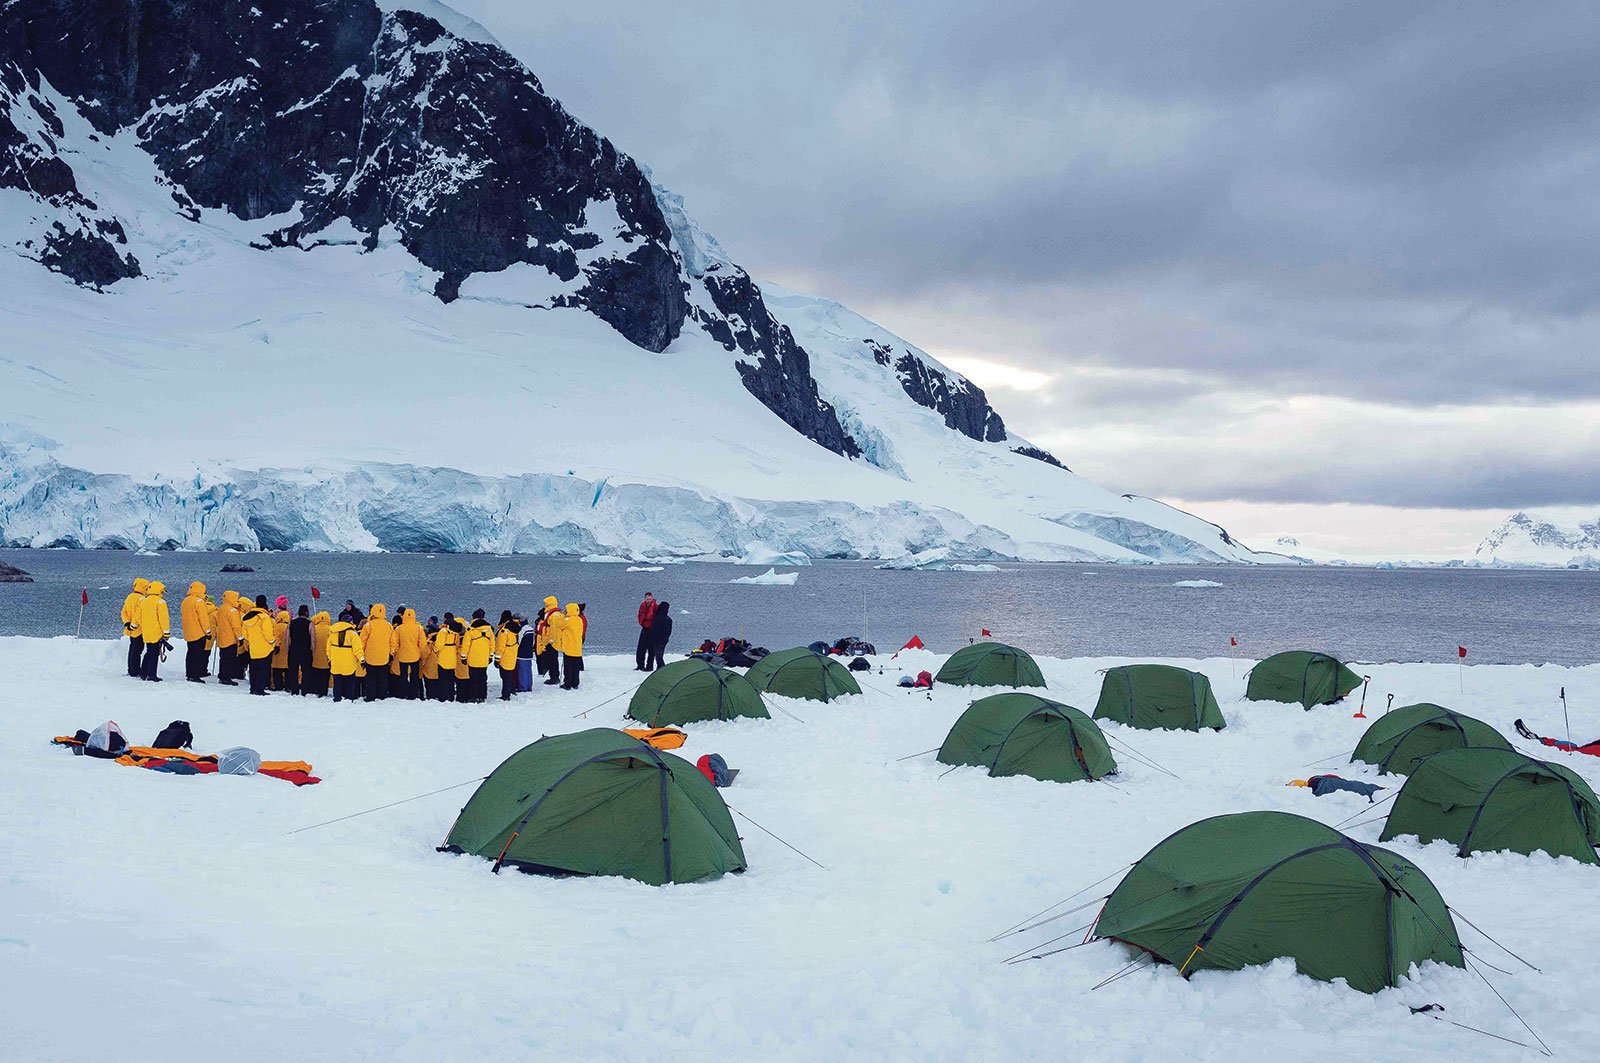 Campers get ready for a night sleeping under the Antarctic sky.